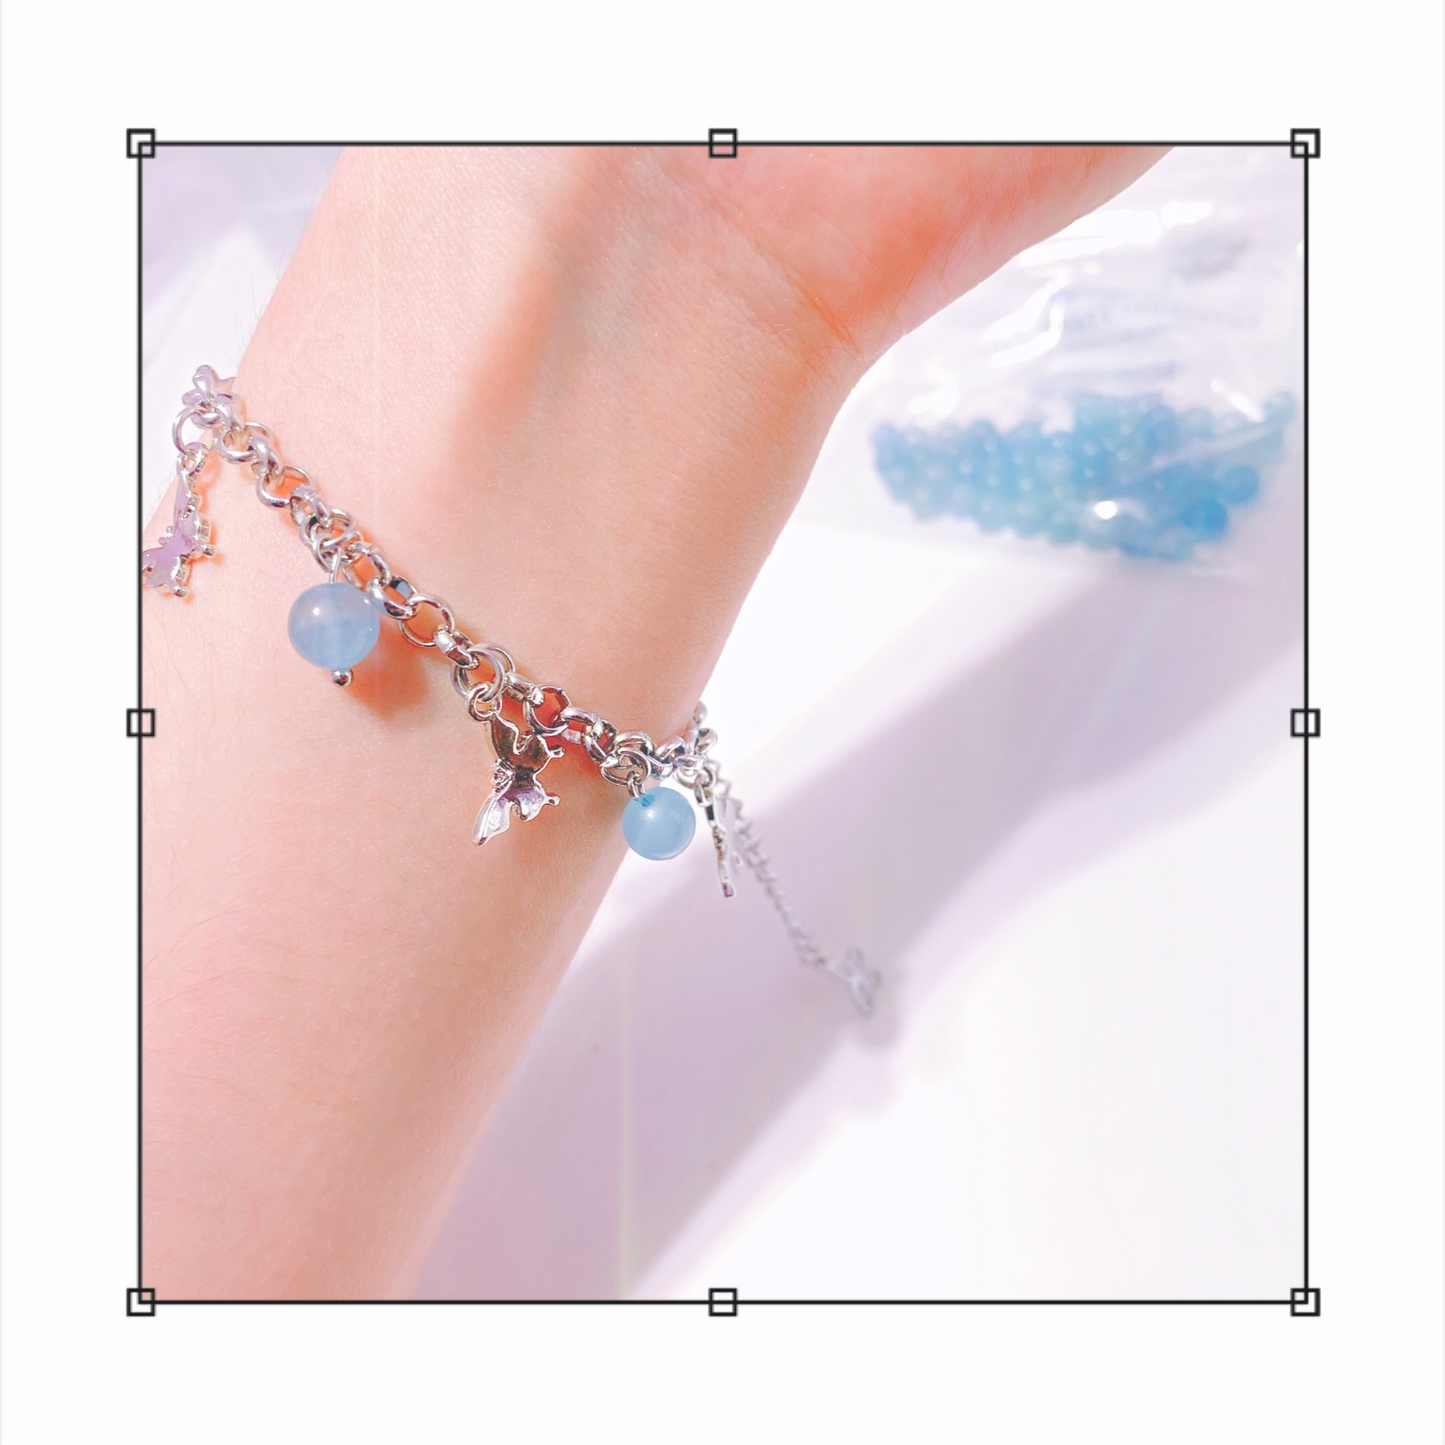 HYYH Charm Bracelet [MADE TO ORDER]